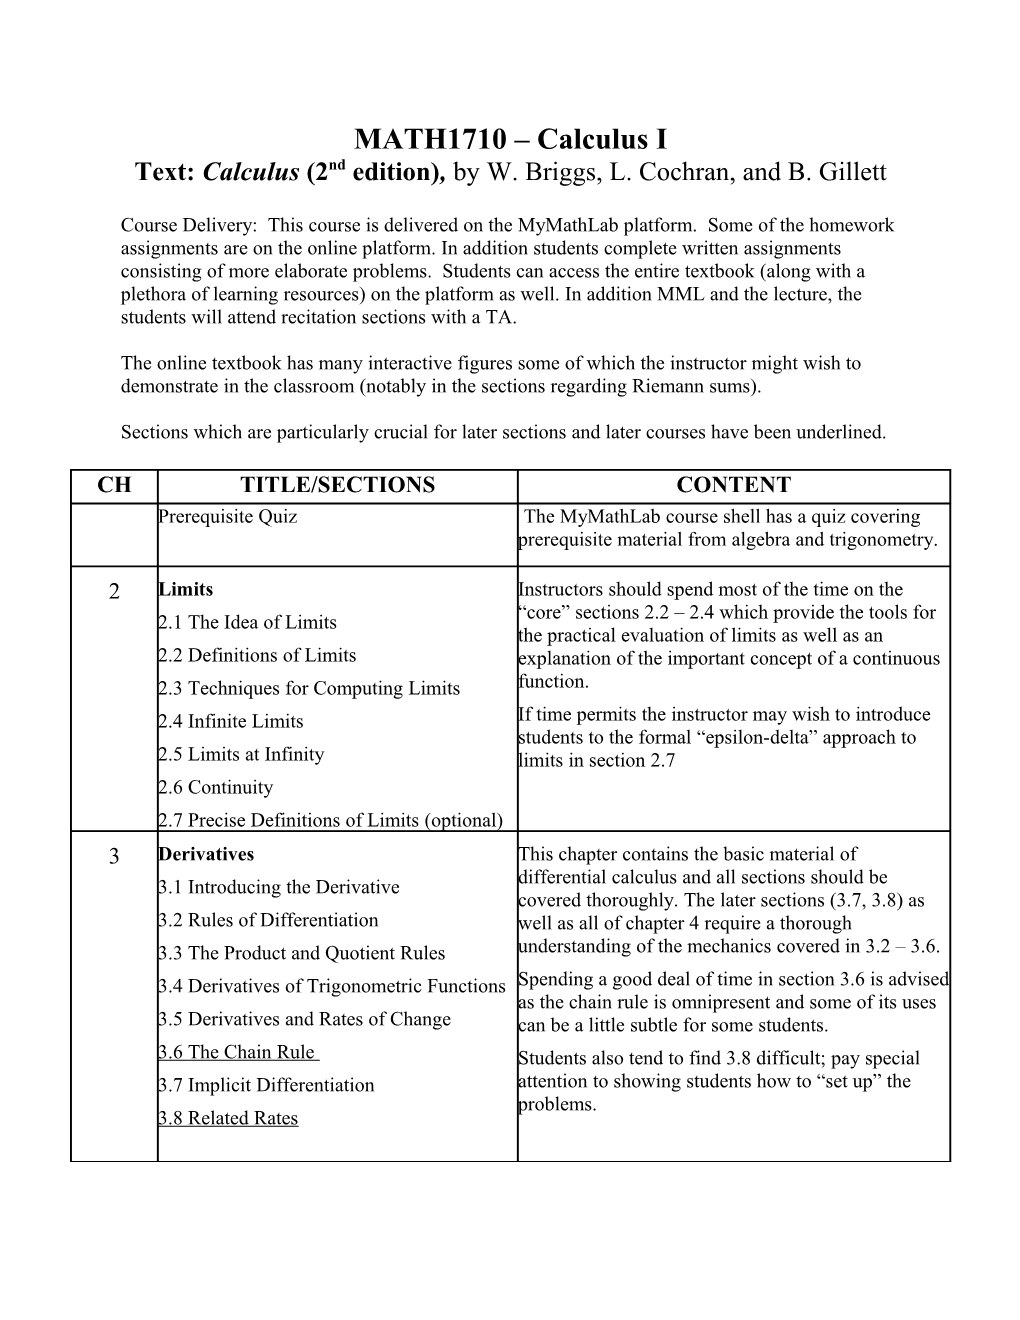 Text: Calculus (2Nd Edition), by W. Briggs, L. Cochran, and B. Gillett